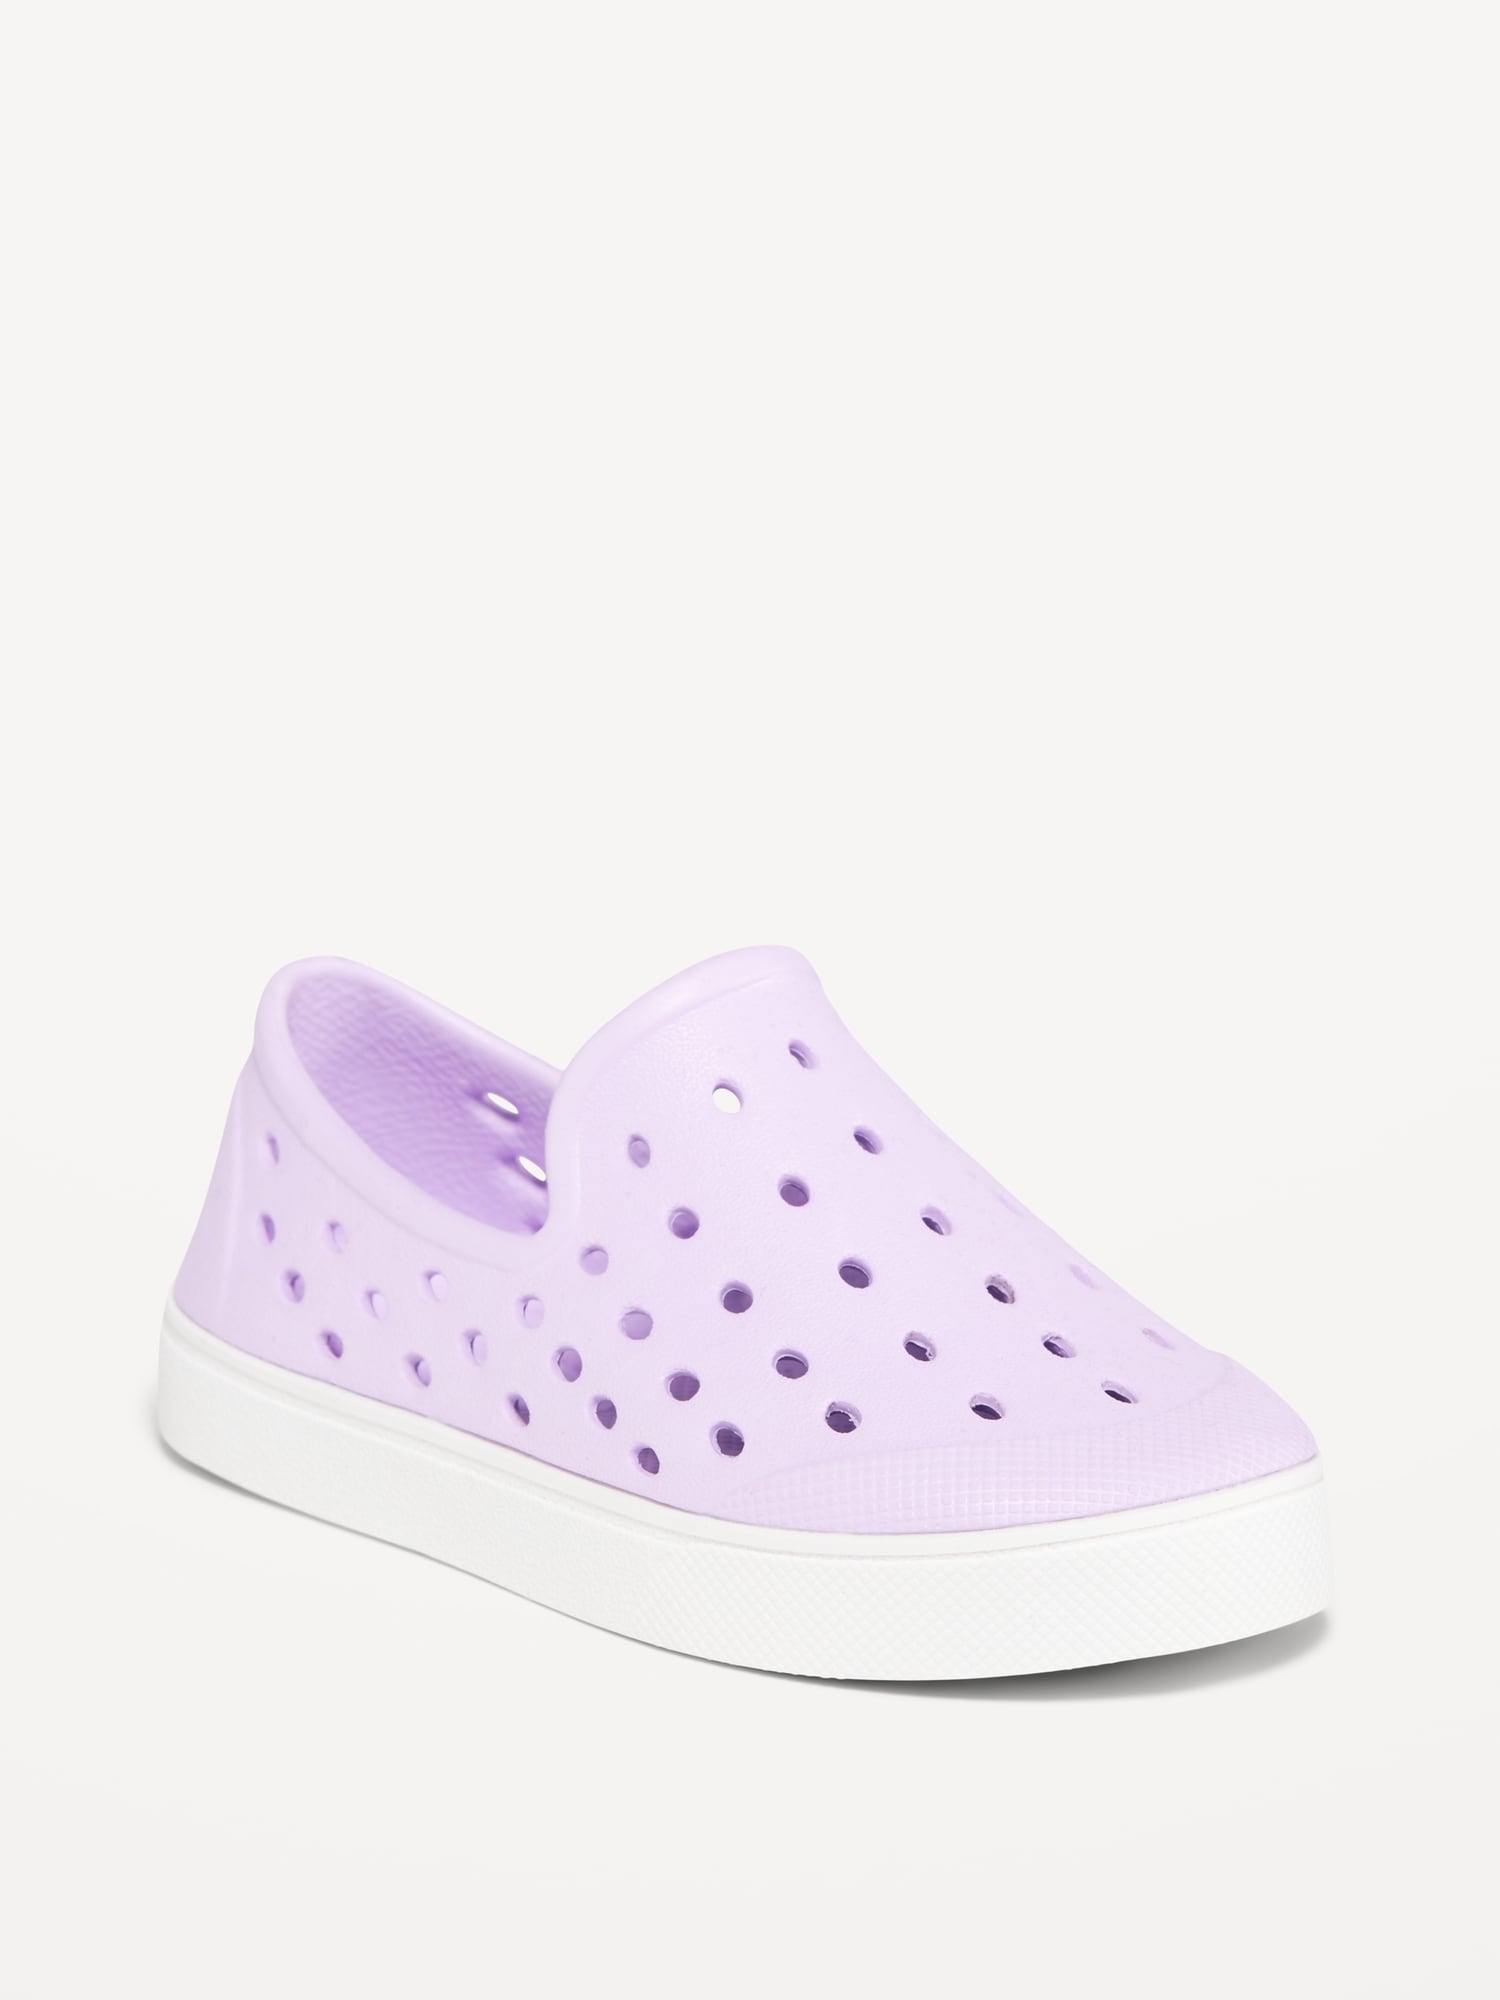 Perforated Slip-On Shoes for Toddler Girls (Partially Plant-Based)